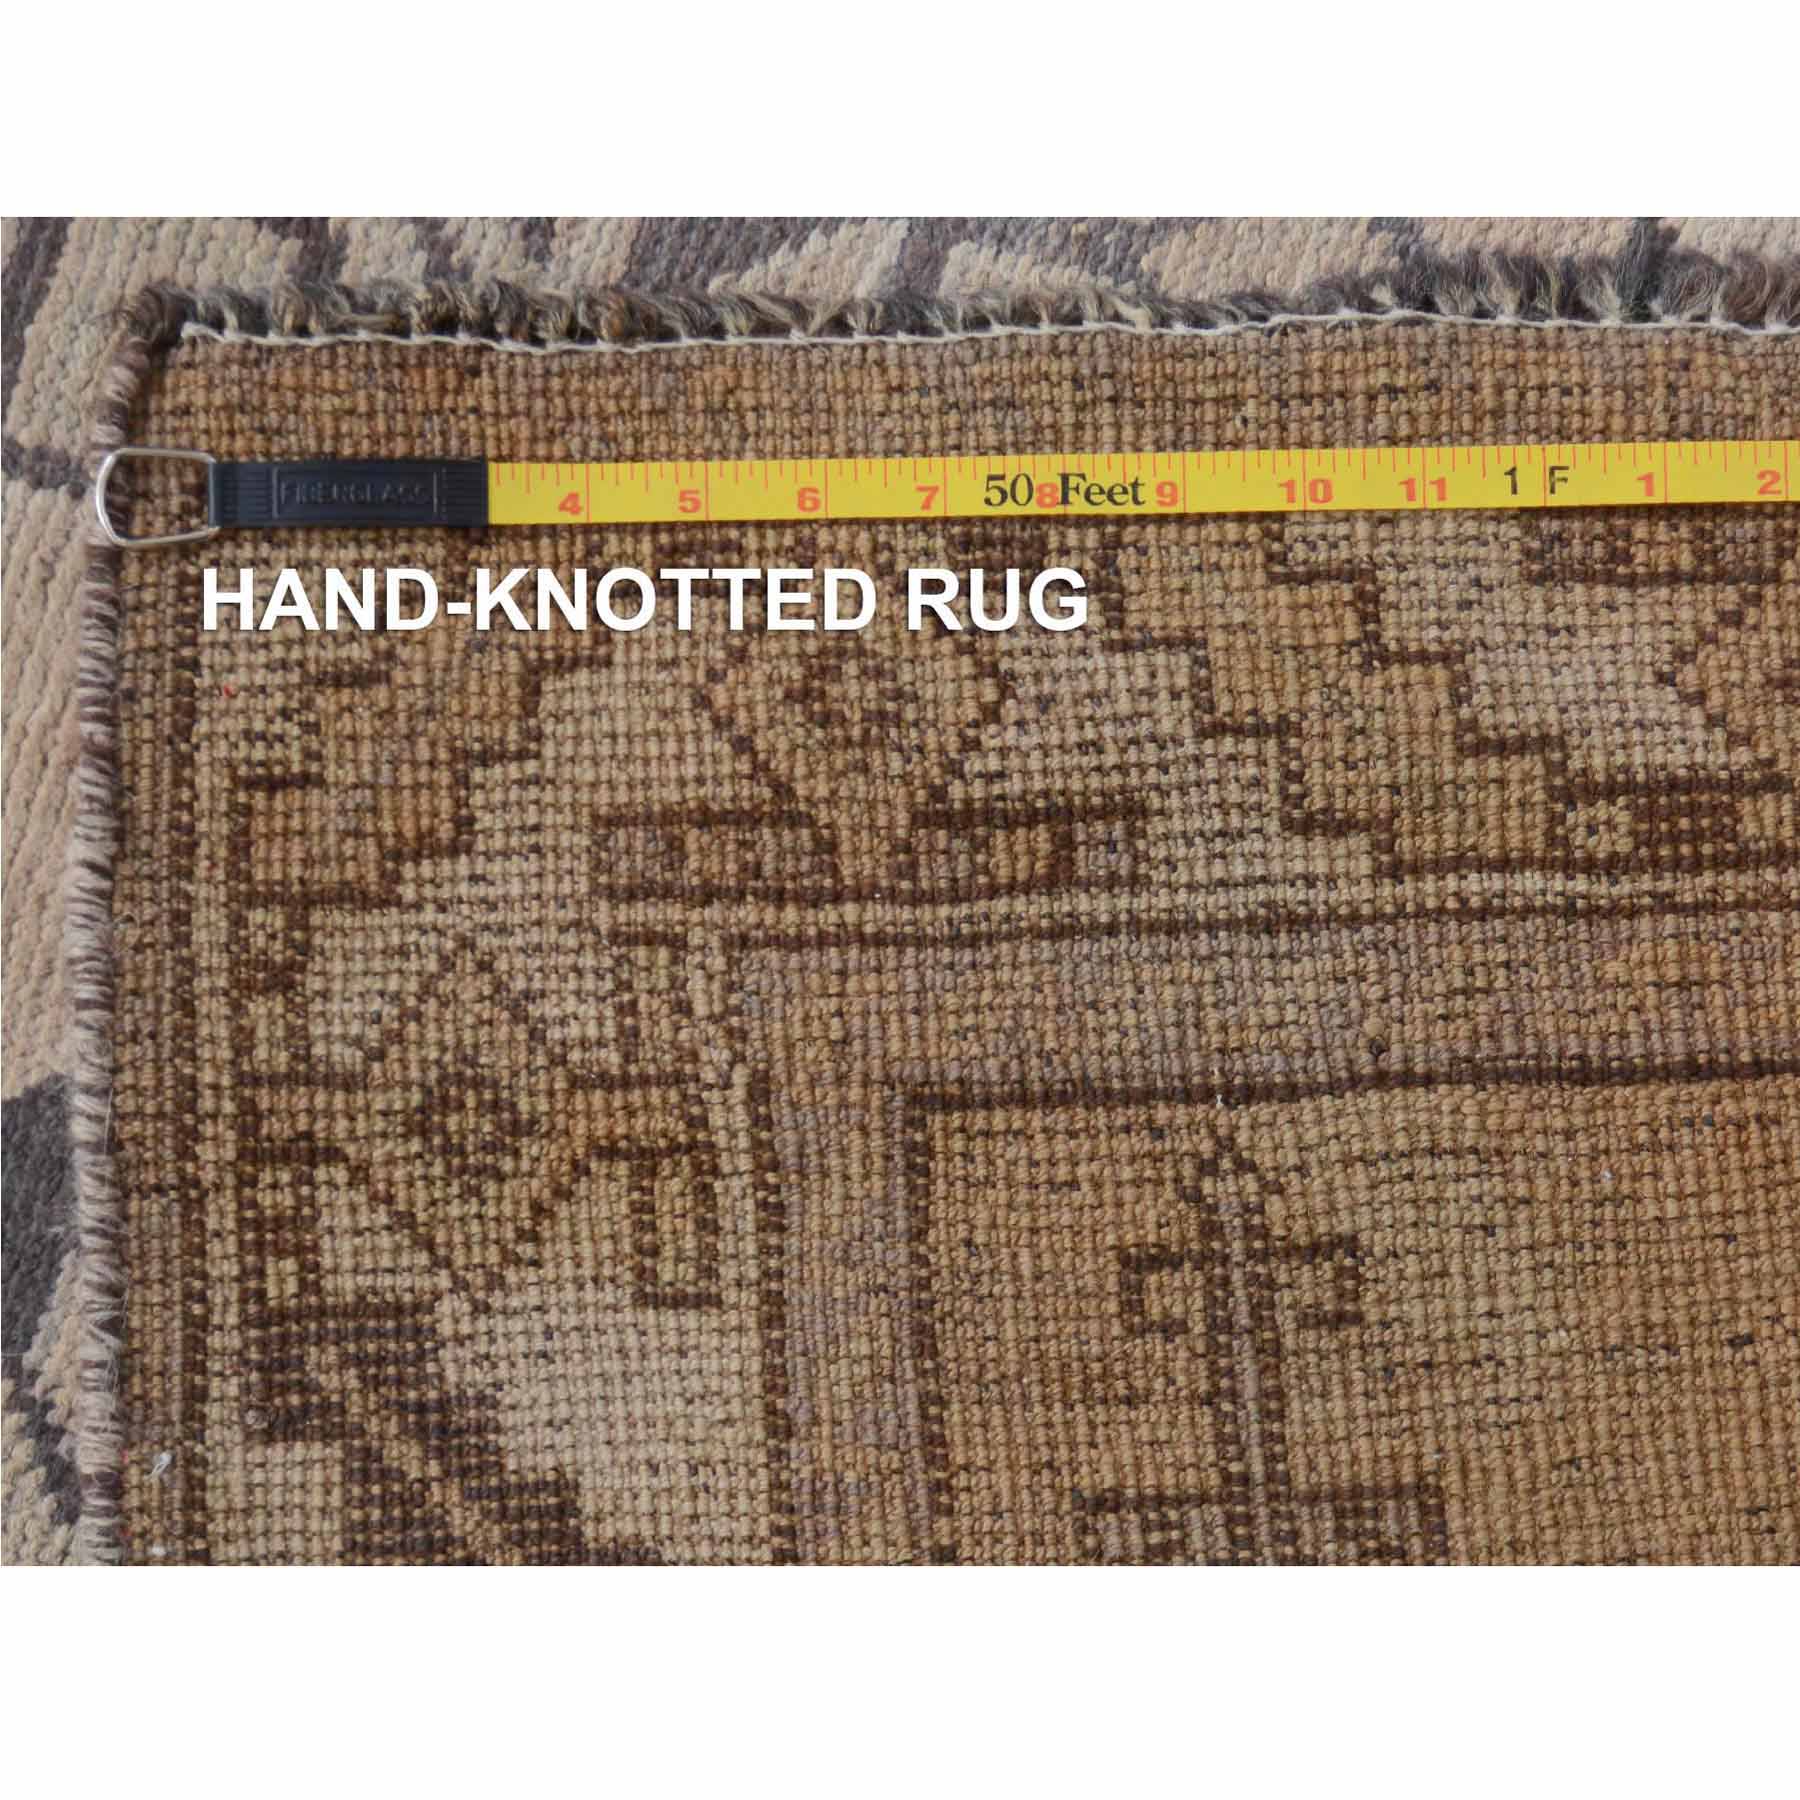 Overdyed-Vintage-Hand-Knotted-Rug-286395